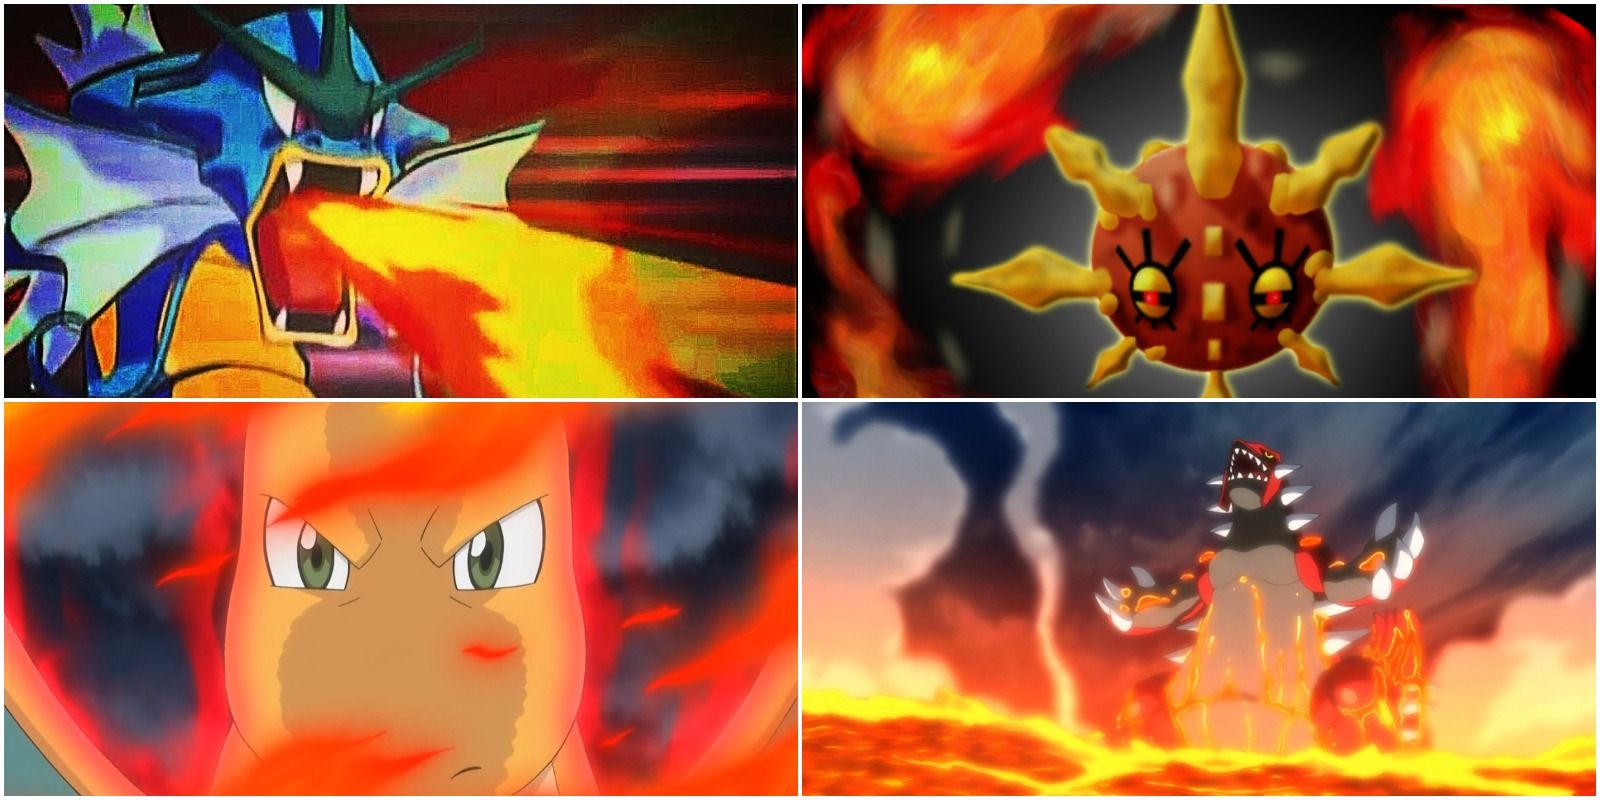 gyarados, solrock, dragonite, and groudon from pokemon with fire and lava around them.